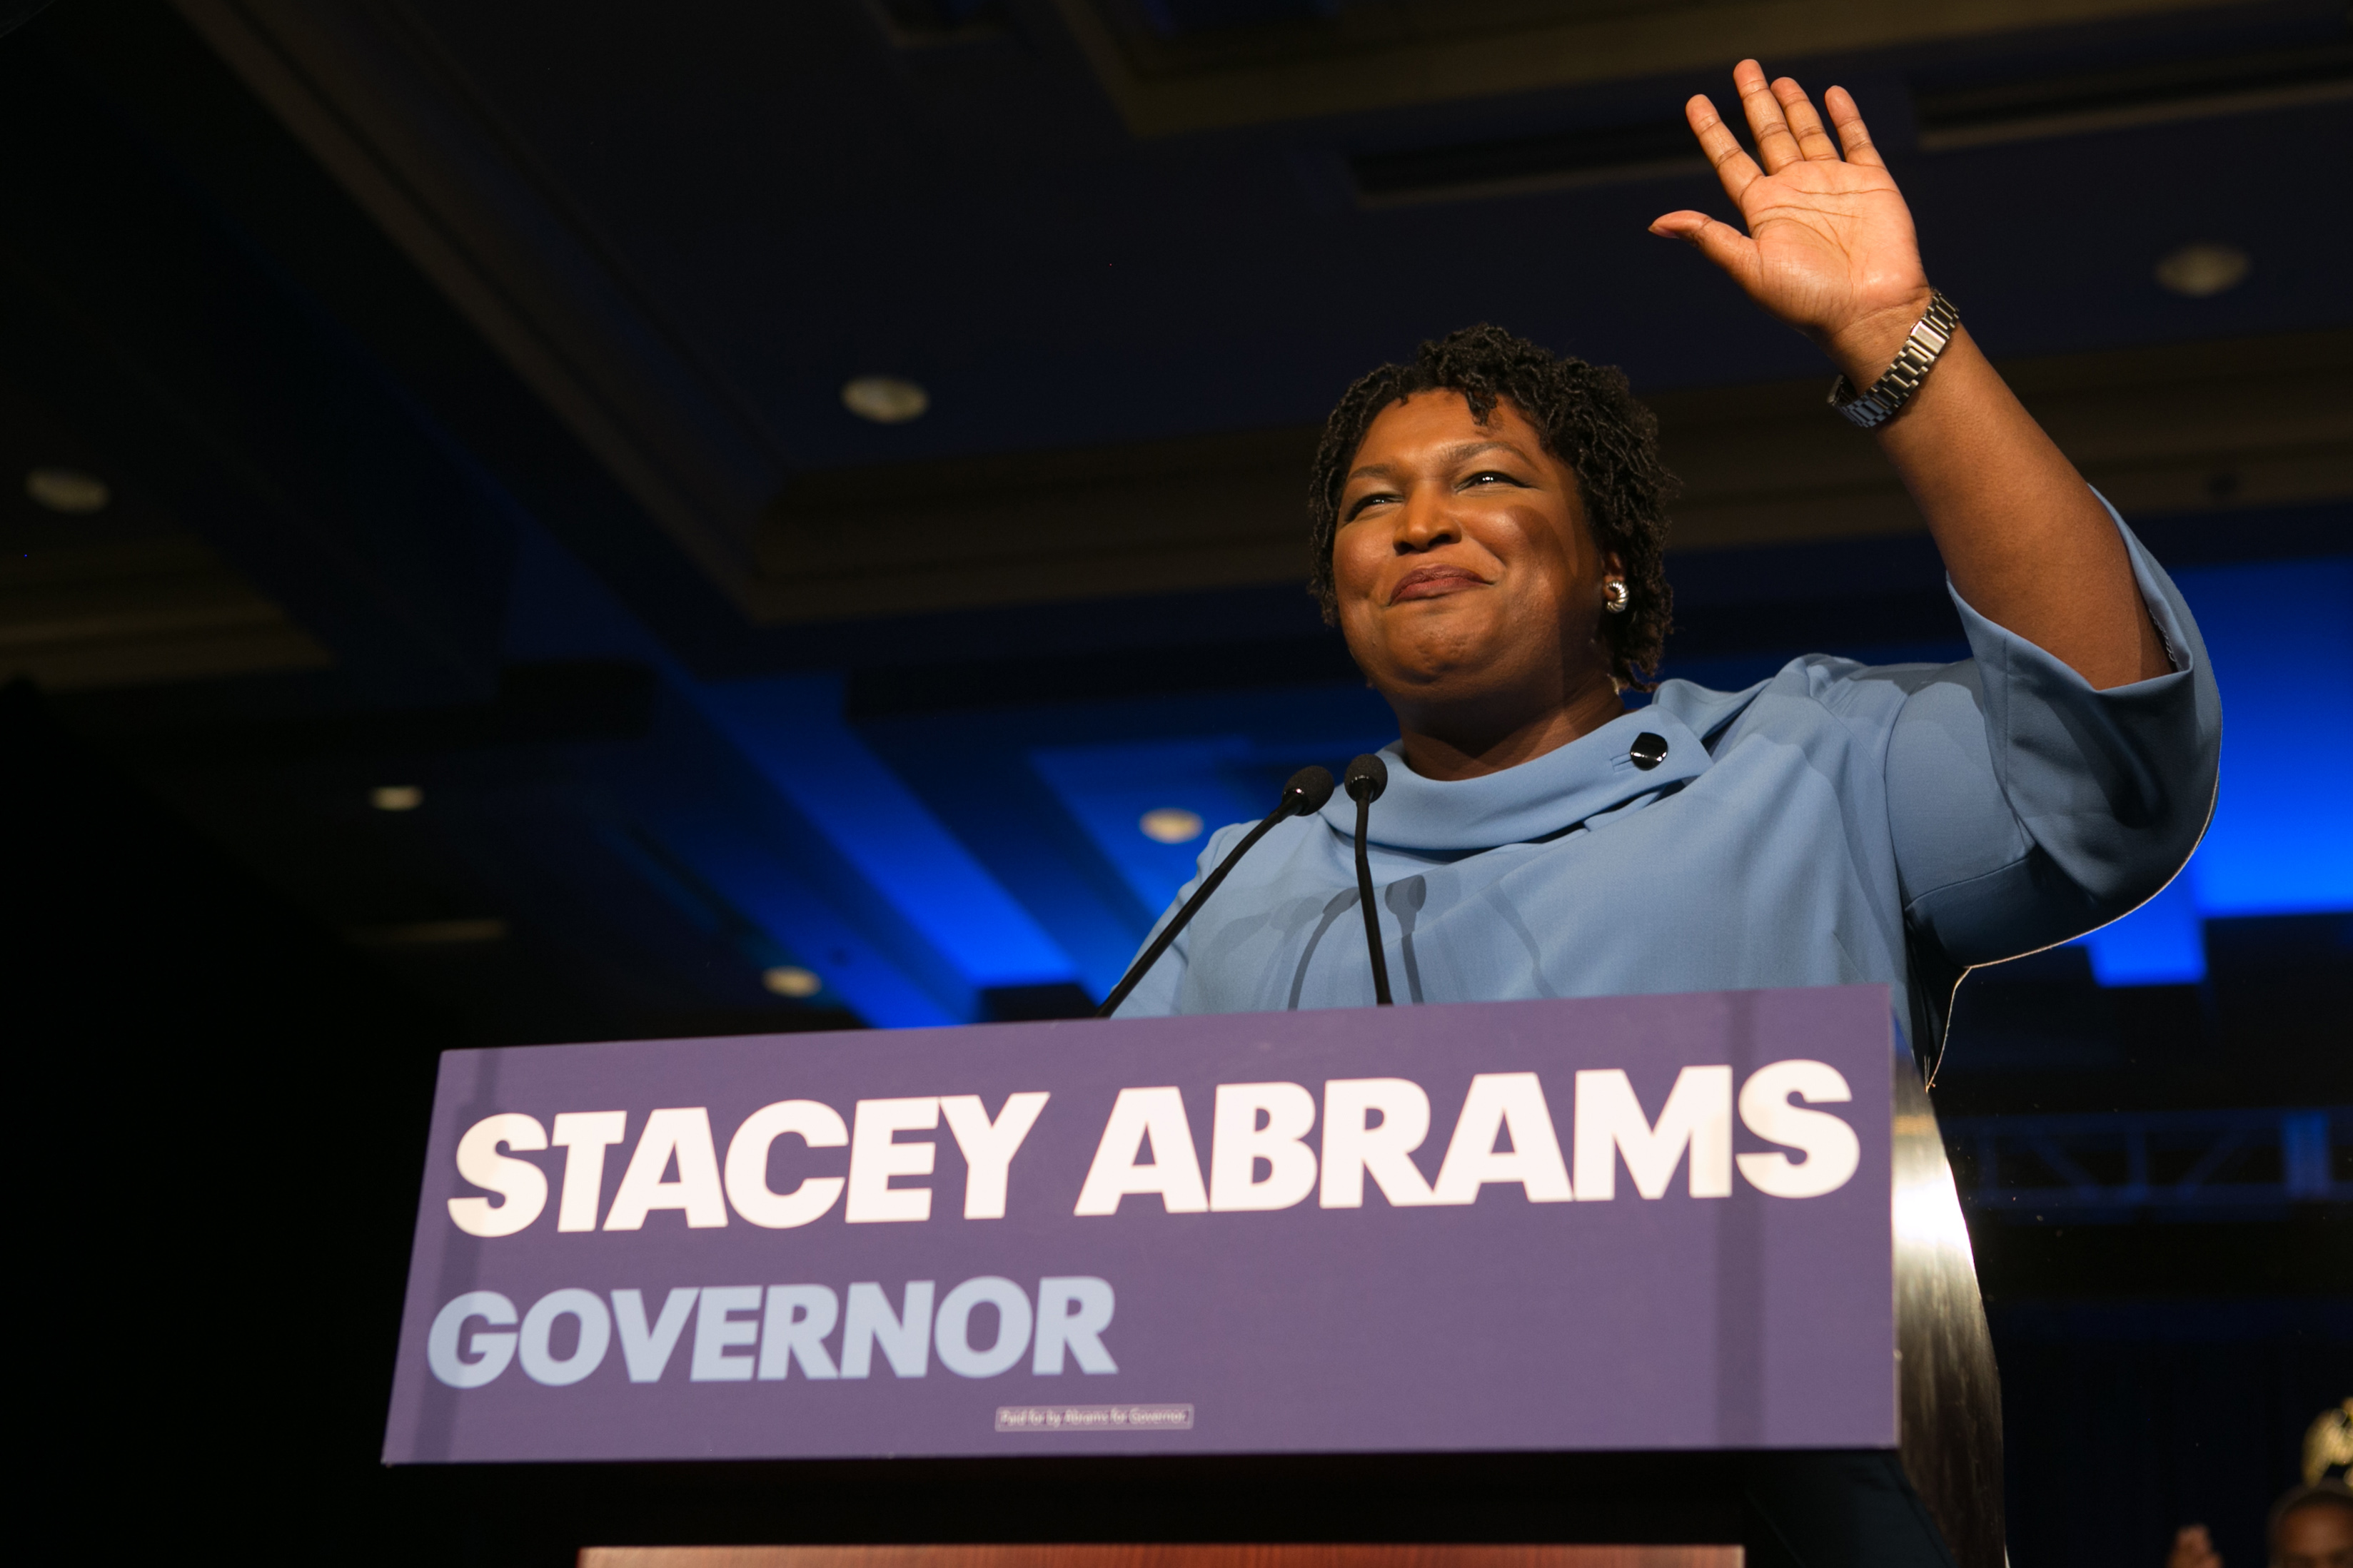 Democratic Gubernatorial candidate Stacey Abrams addresses supporters at an election watch party on November 6, 2018 in Atlanta, Georgia. (Photo by Jessica McGowan/Getty Images)